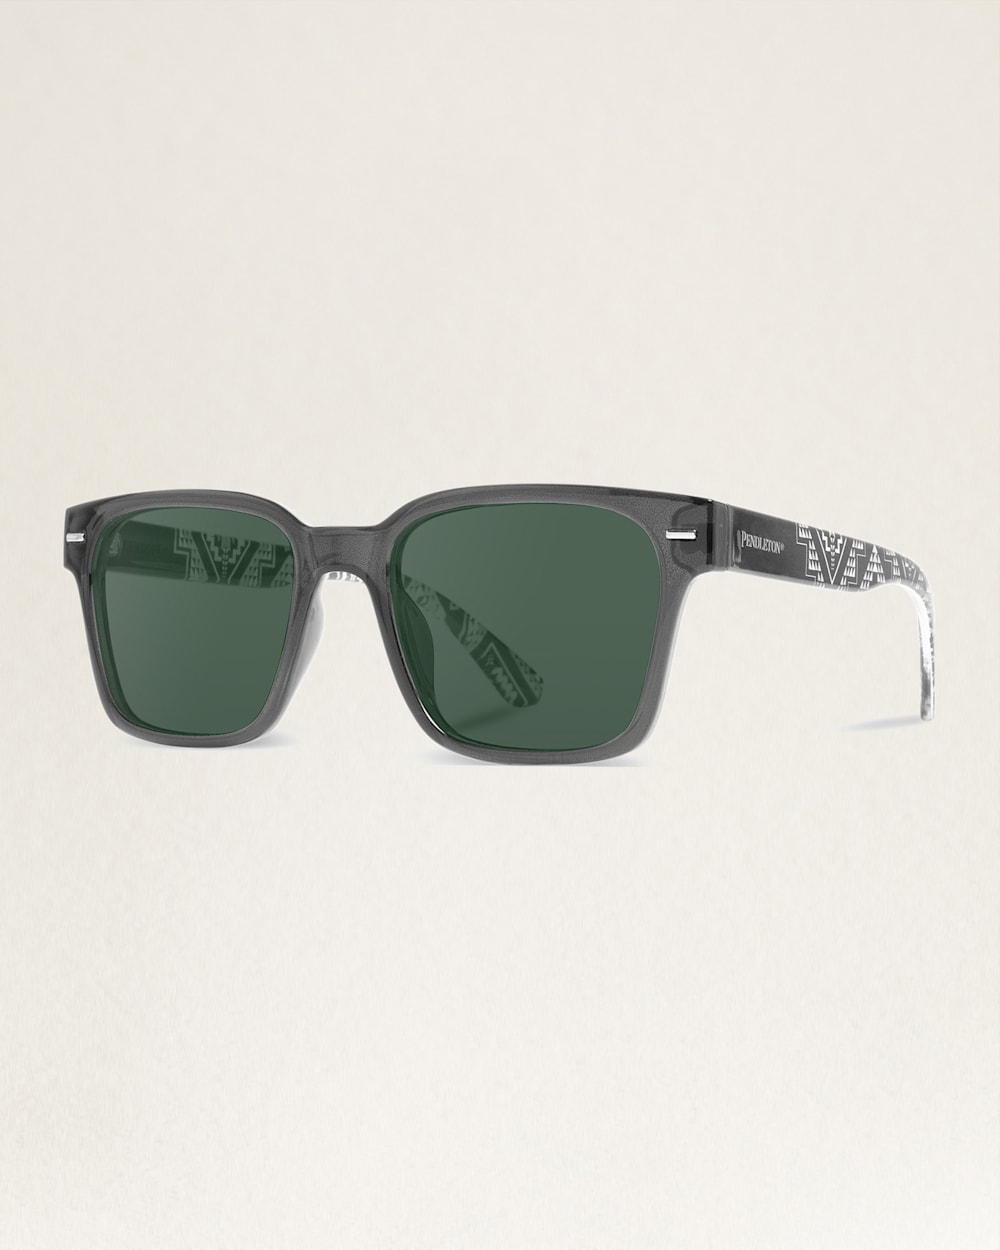 ALTERNATE VIEW OF SHWOOD X PENDLETON COBY POLARIZED SUNGLASSES IN GREY CRYSTAL/BLACK OXBOW image number 2